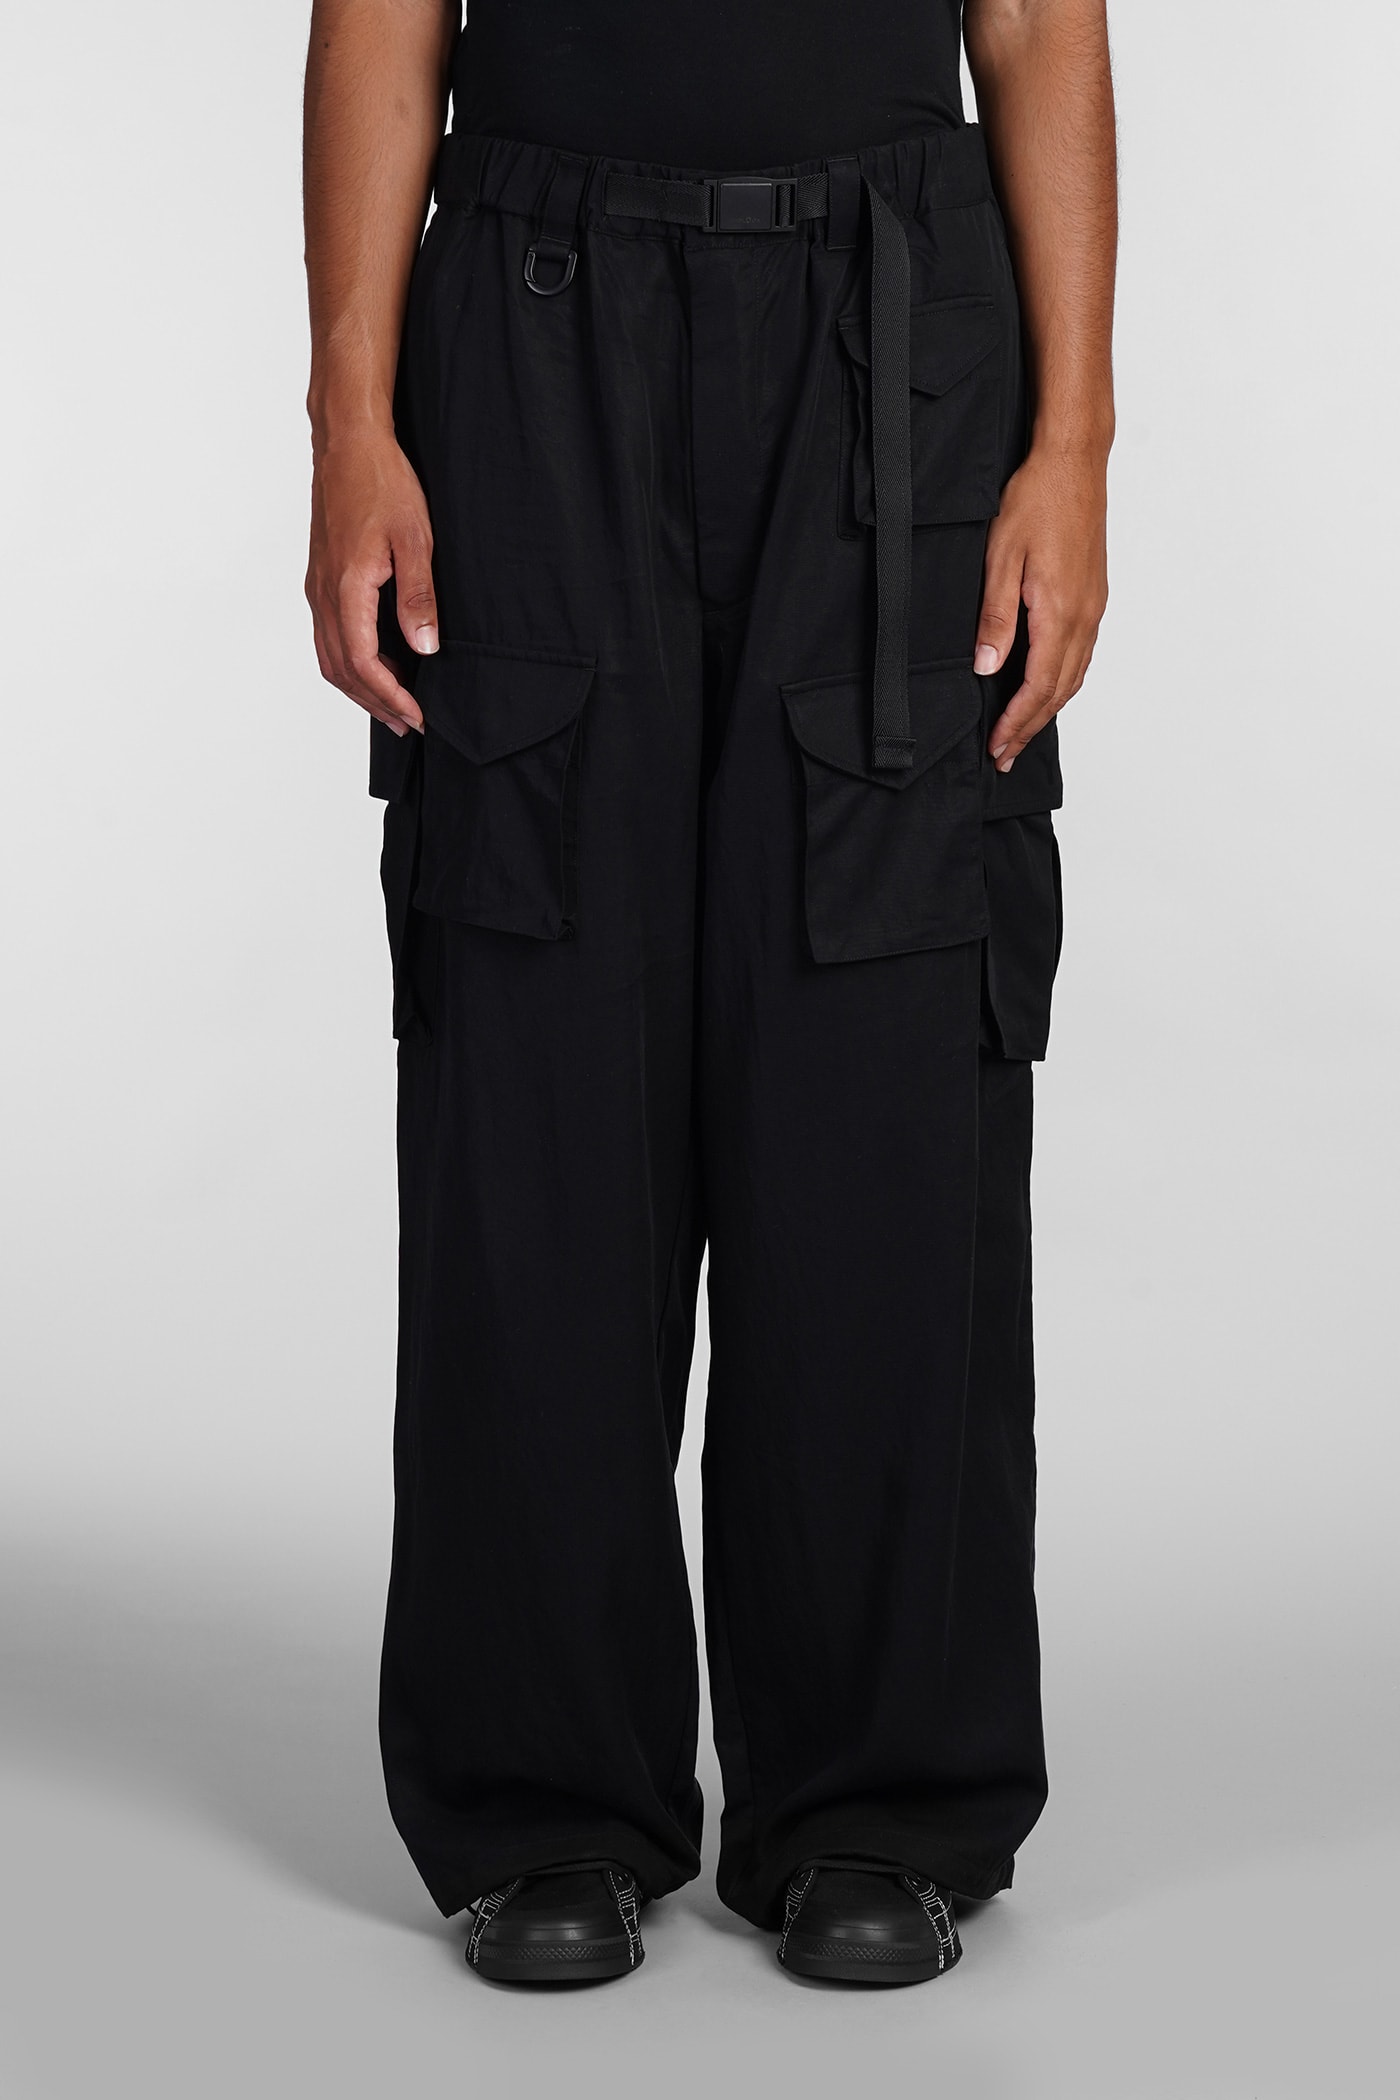 Pants In Black Wool And Polyester